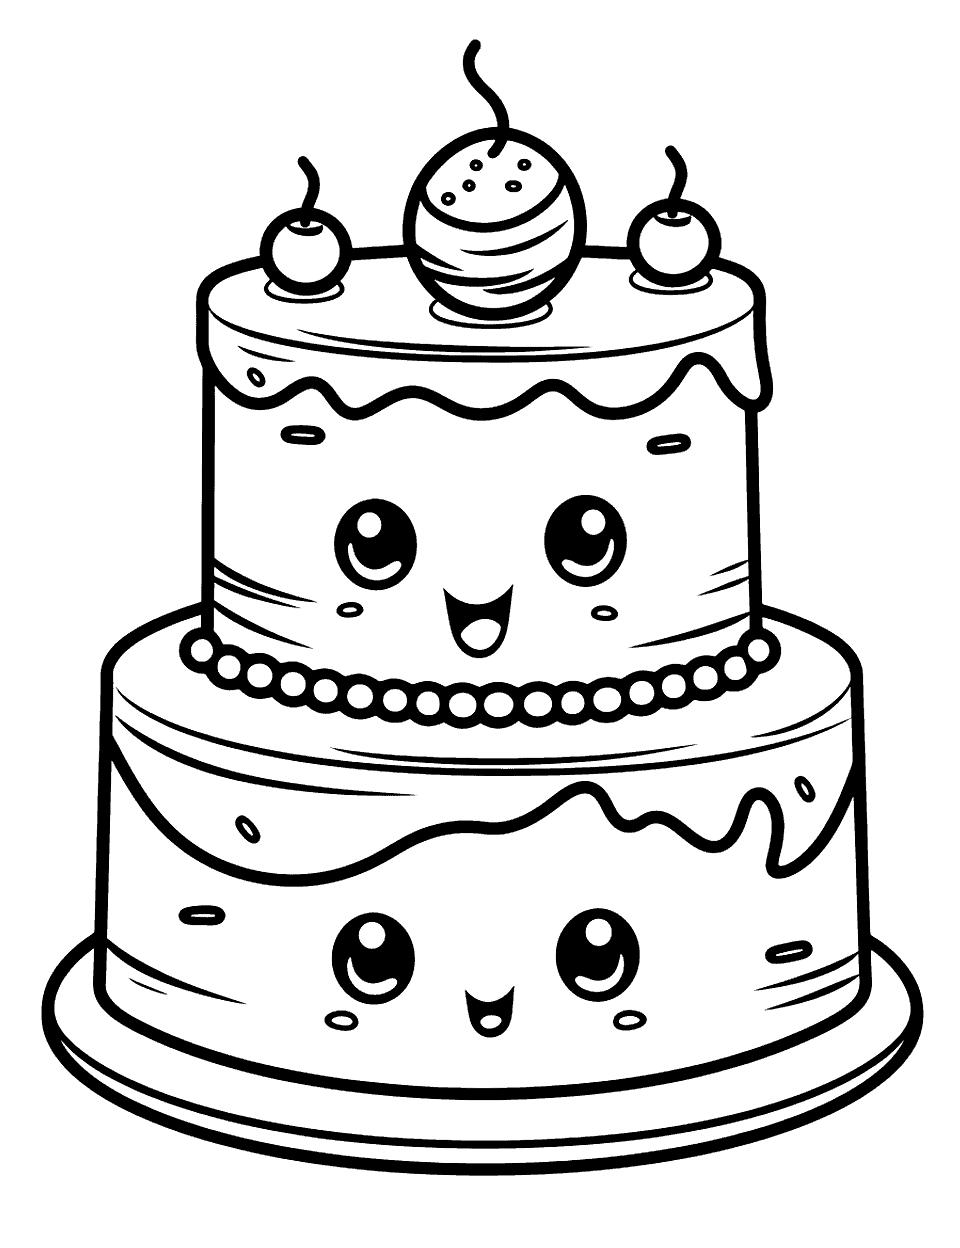 Kawaii Cake Coloring Page - A cartoon-style cake with cute facial expressions and decorations.